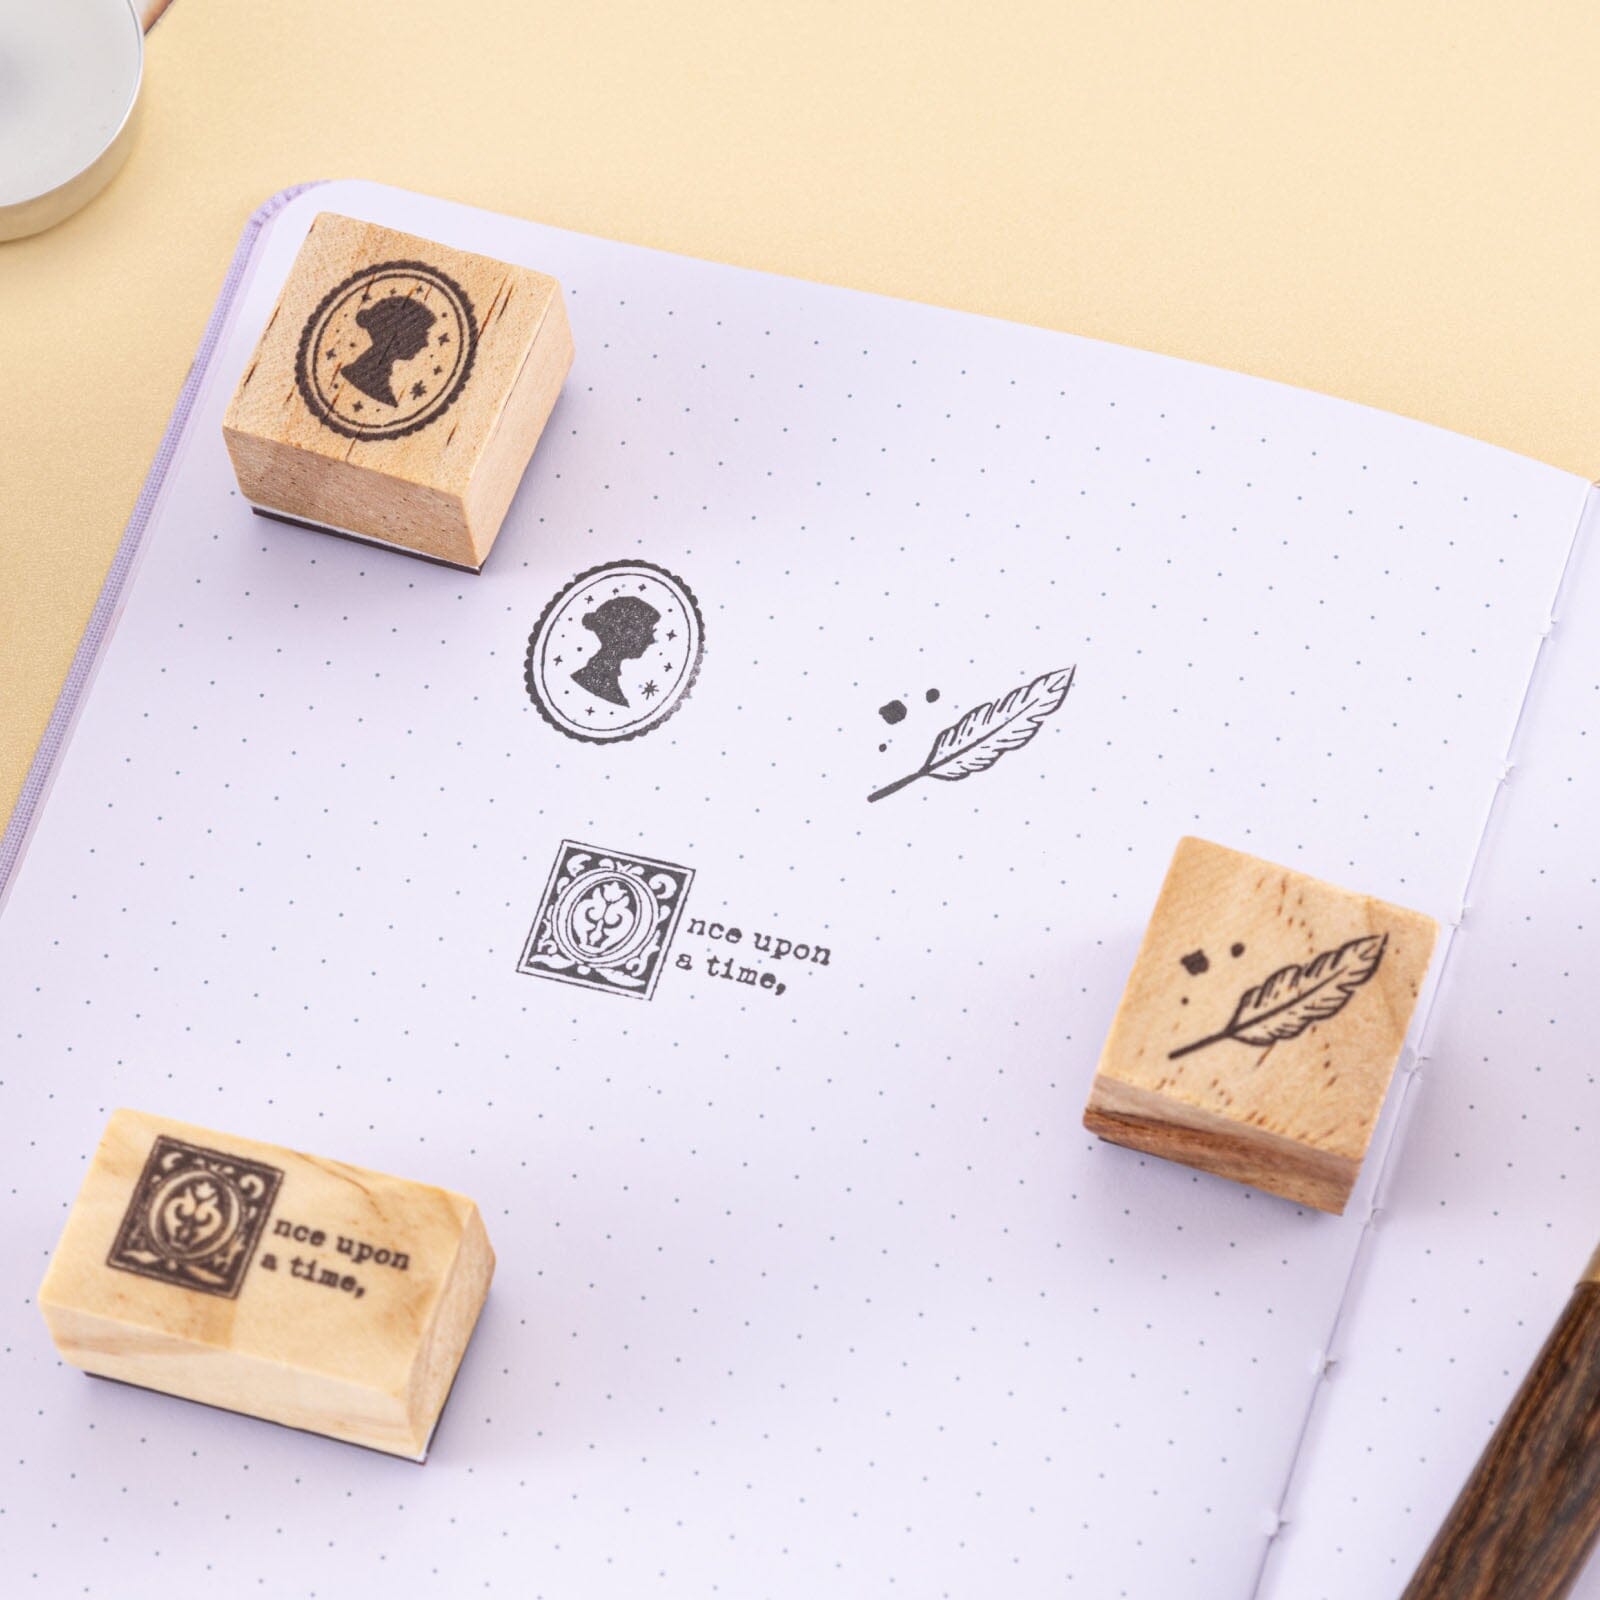 Tsuki Our Storries rubber stamp icons on white paper